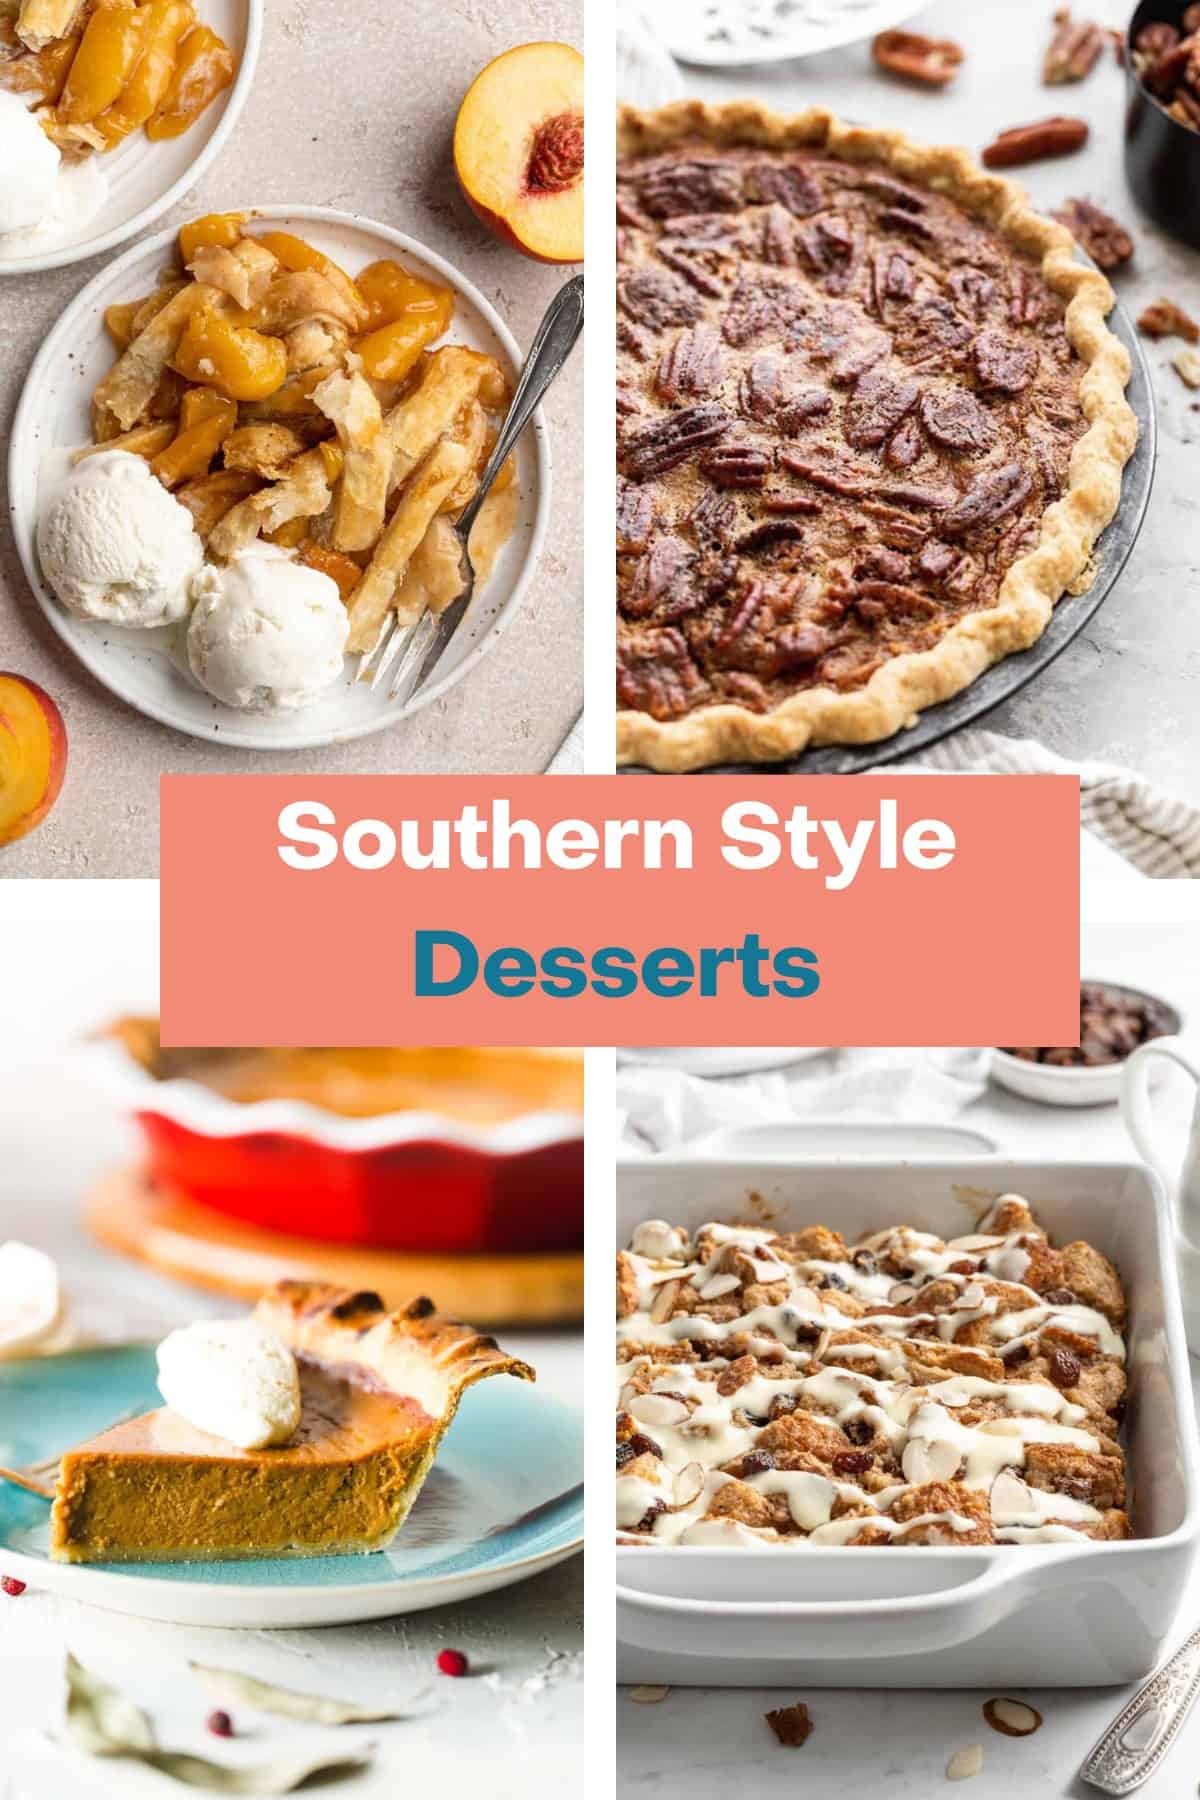 Southern style desserts